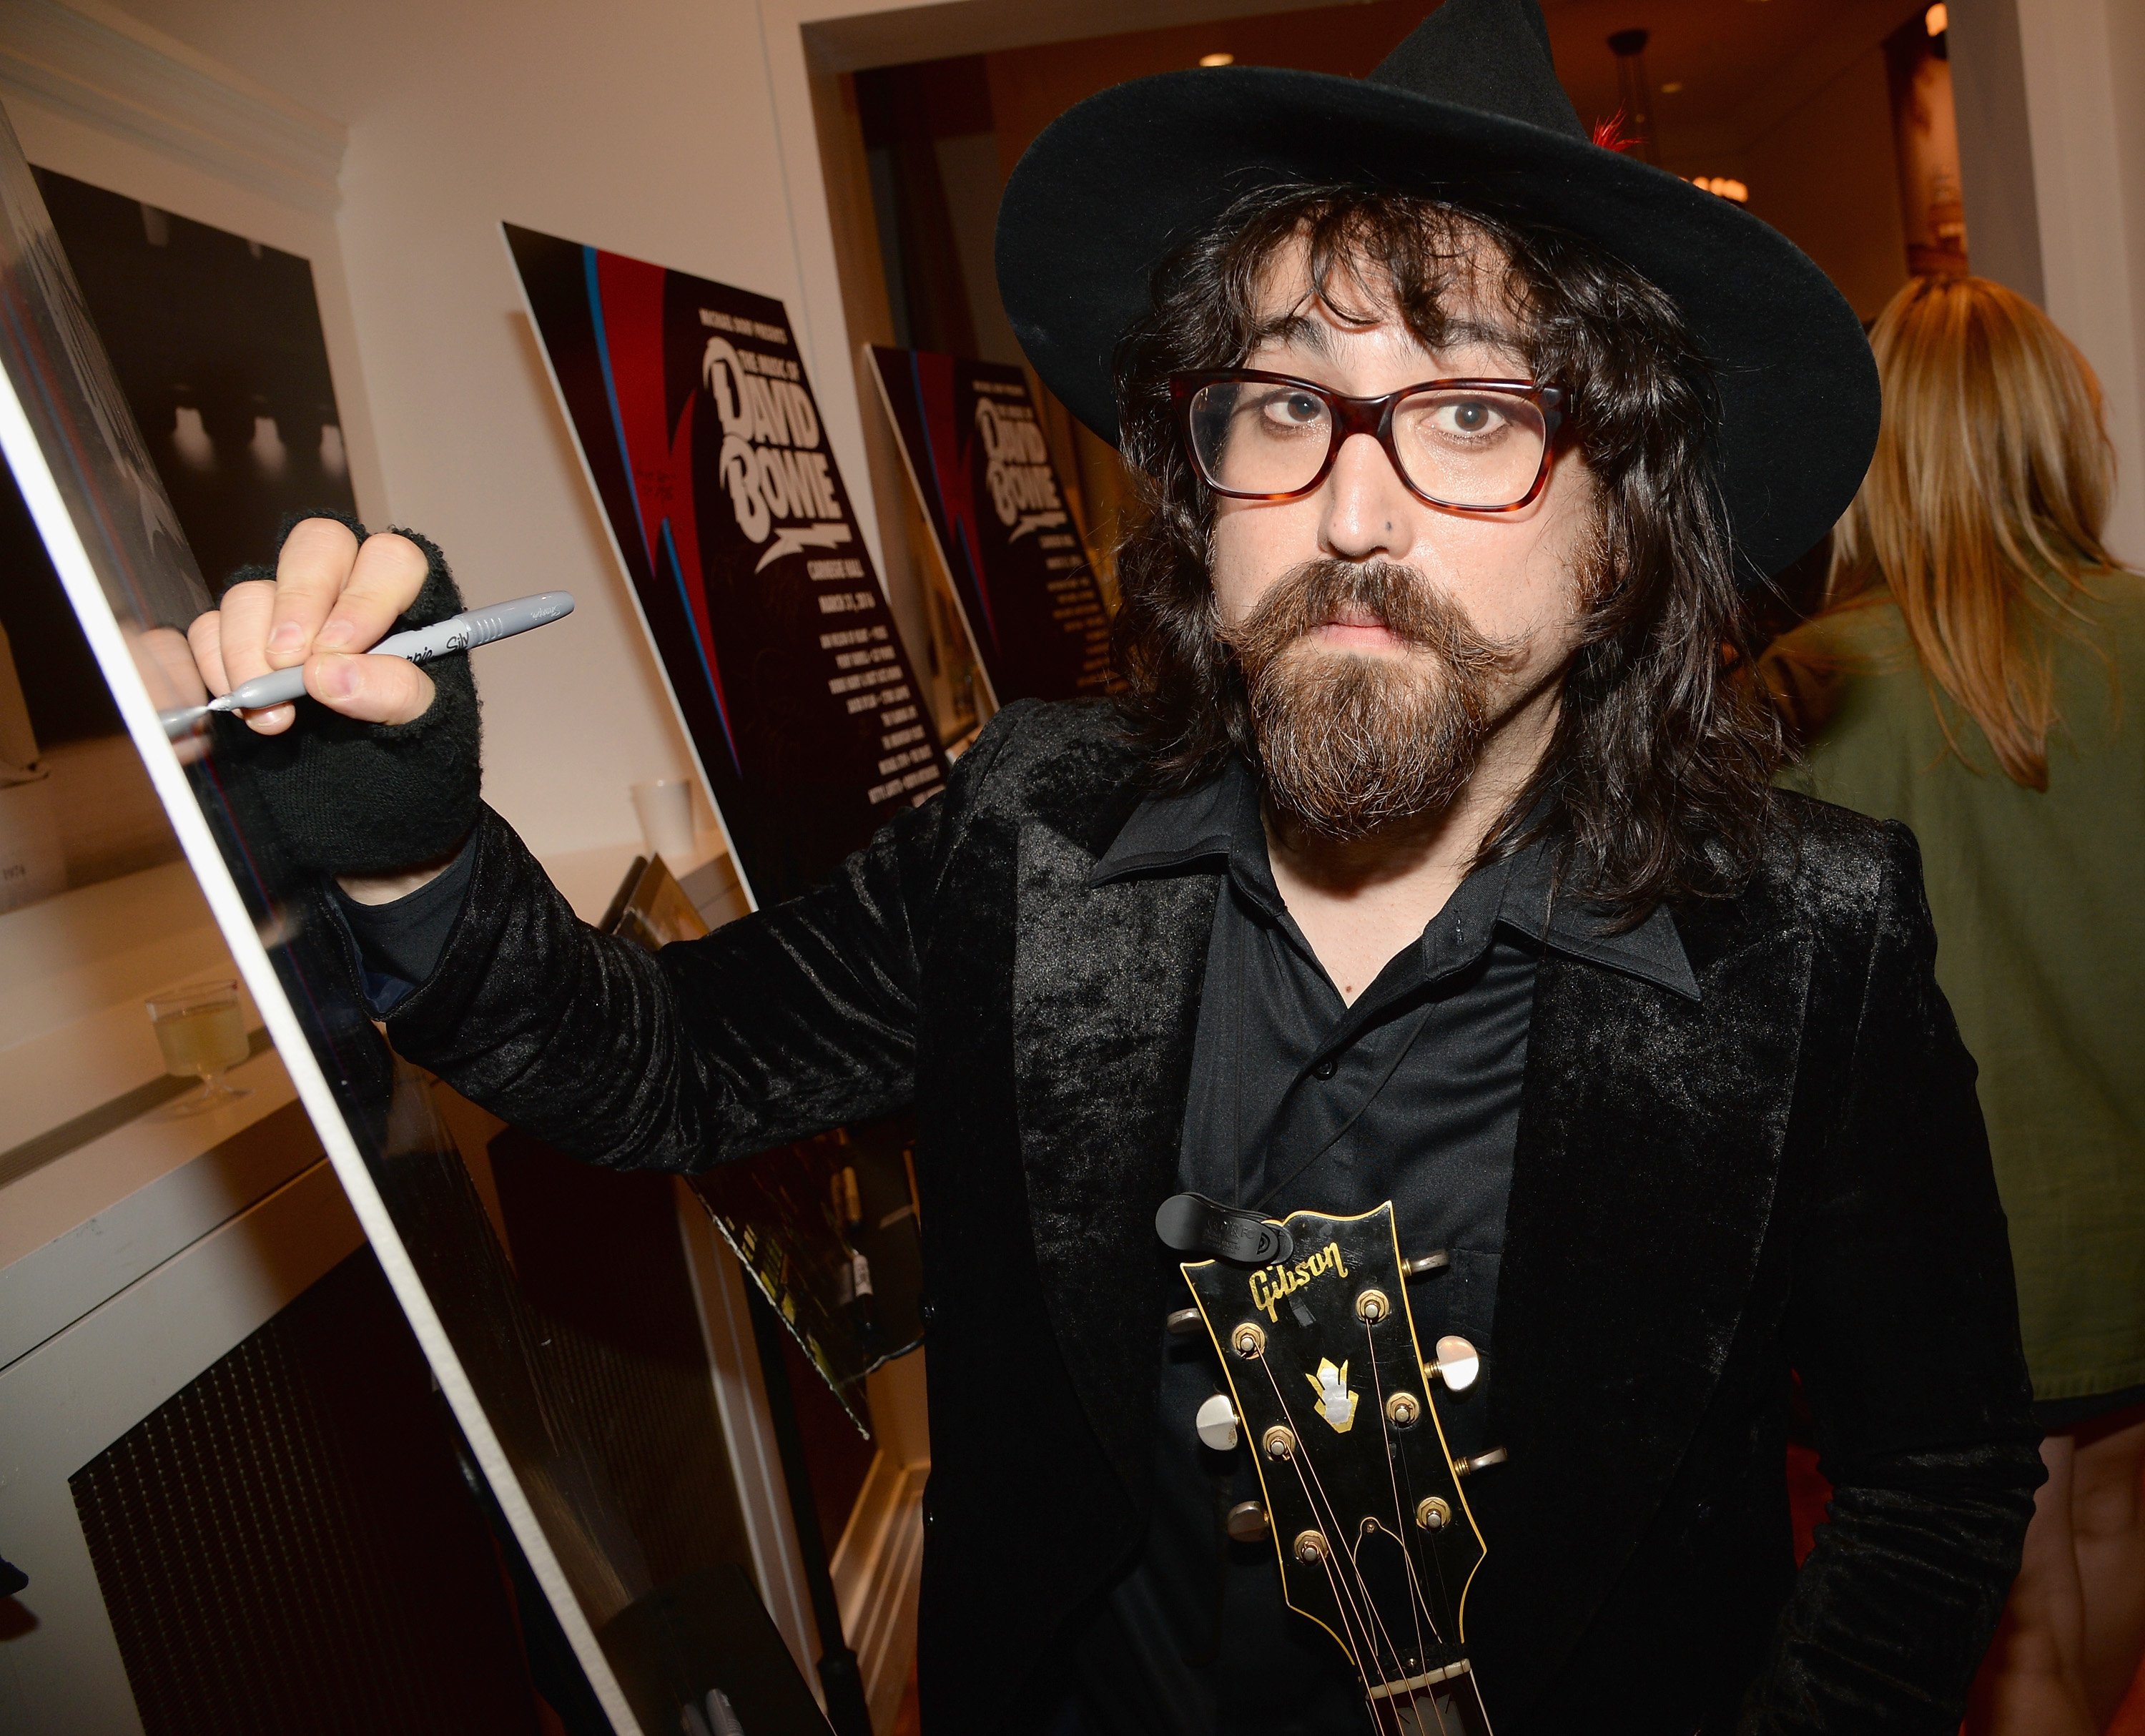 Sean Lennon signing a poster with a marker